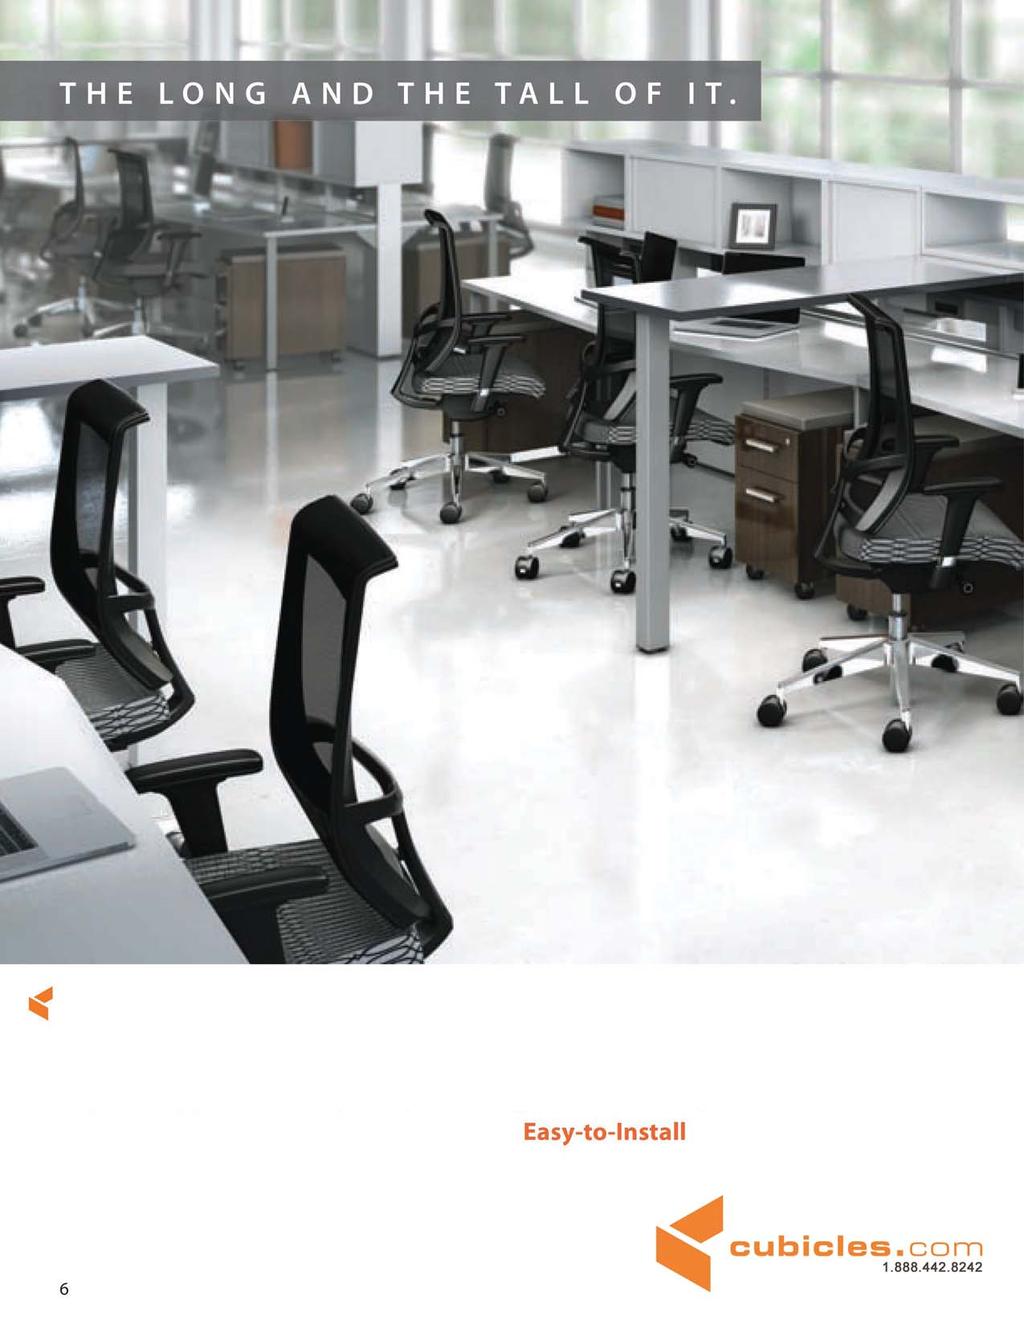 .;: An "open office envlronmen~ makes extremety efficient use of real estate while promoting collaboration.